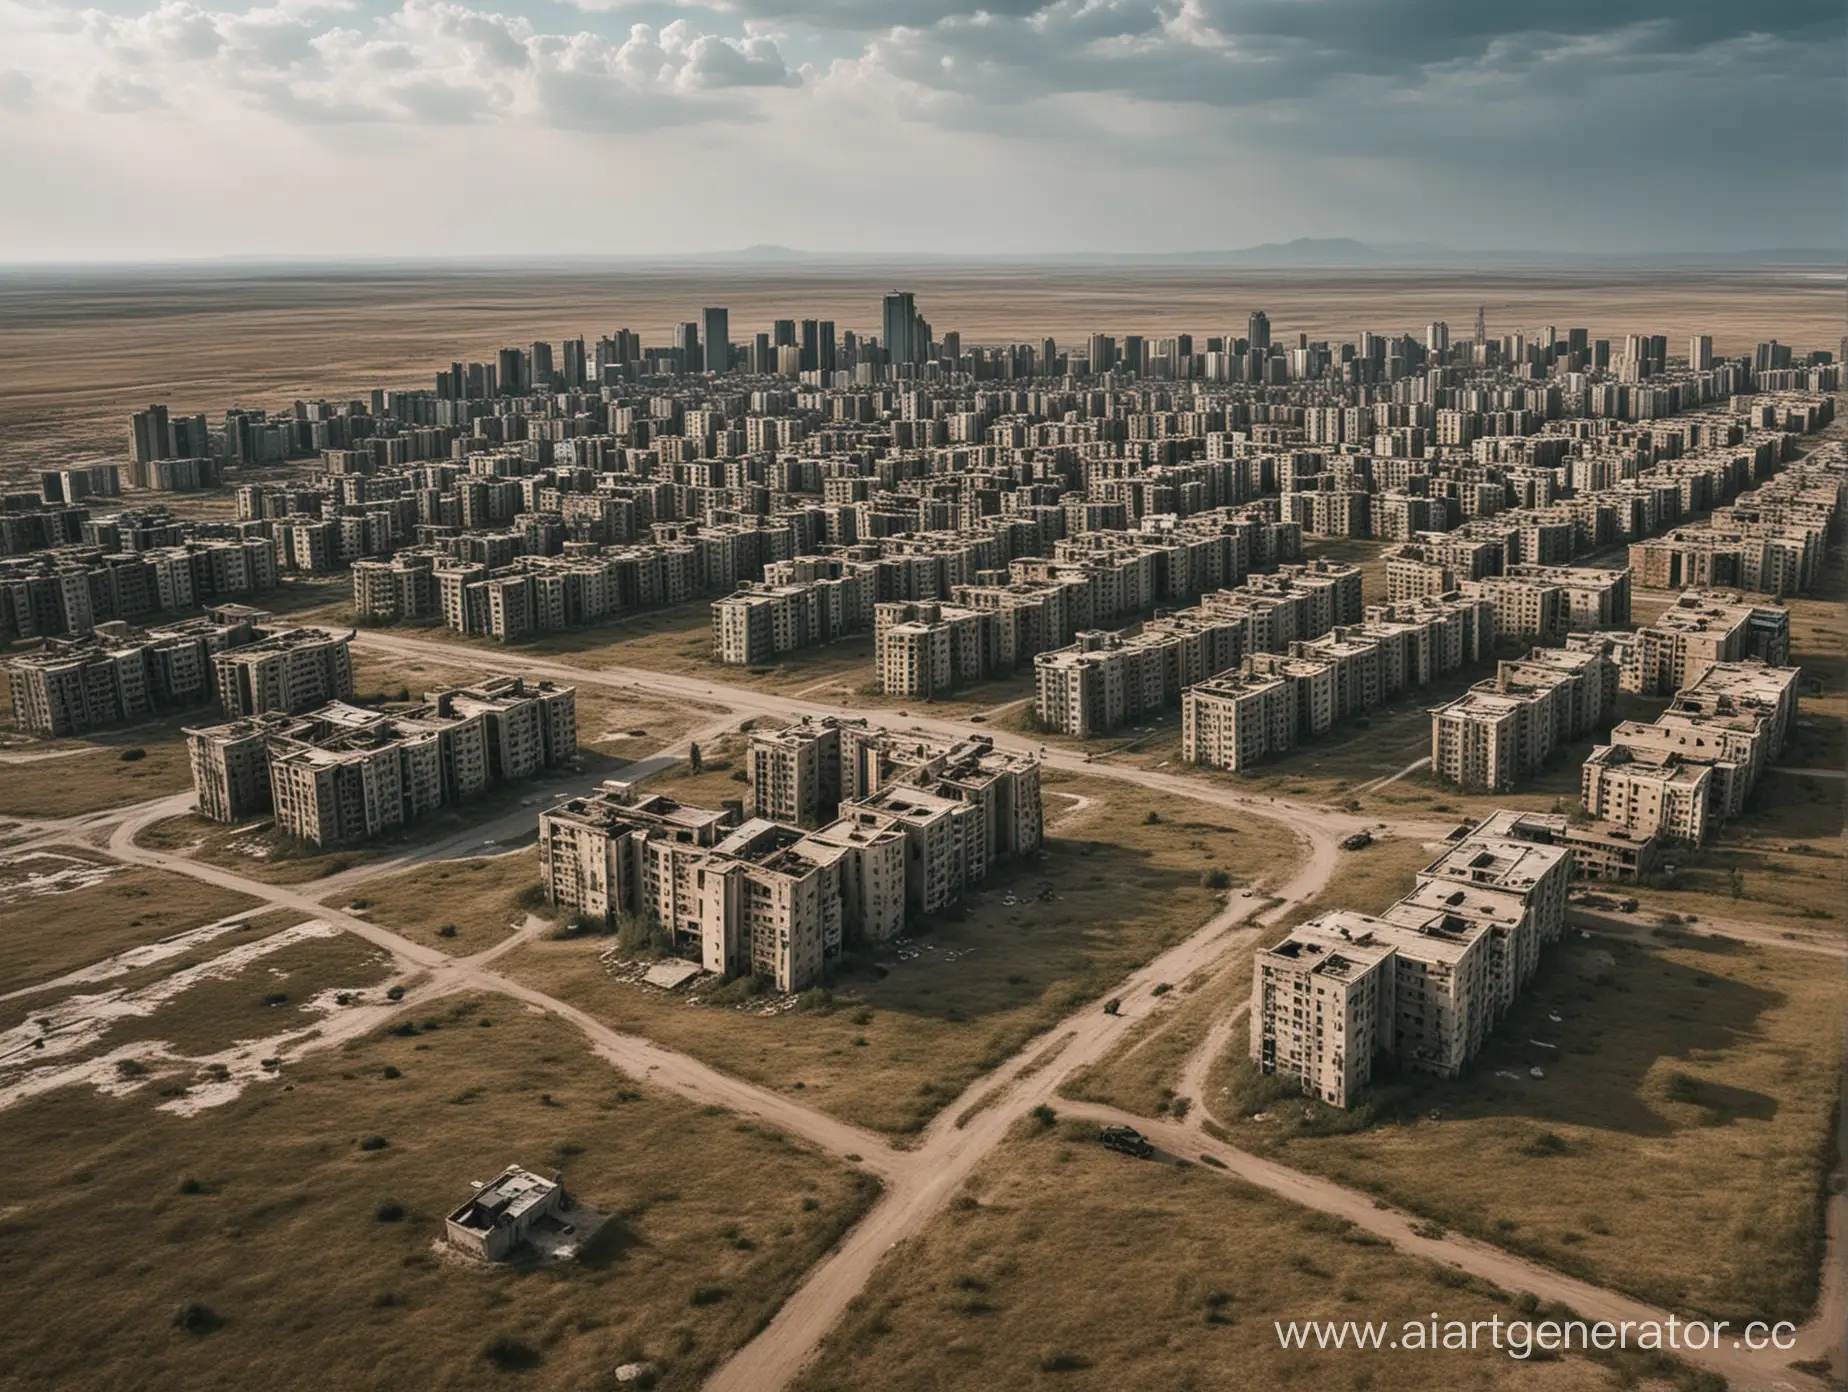 Desolate-Urban-Landscape-PostApocalyptic-City-in-the-Steppes-of-Kazakhstan